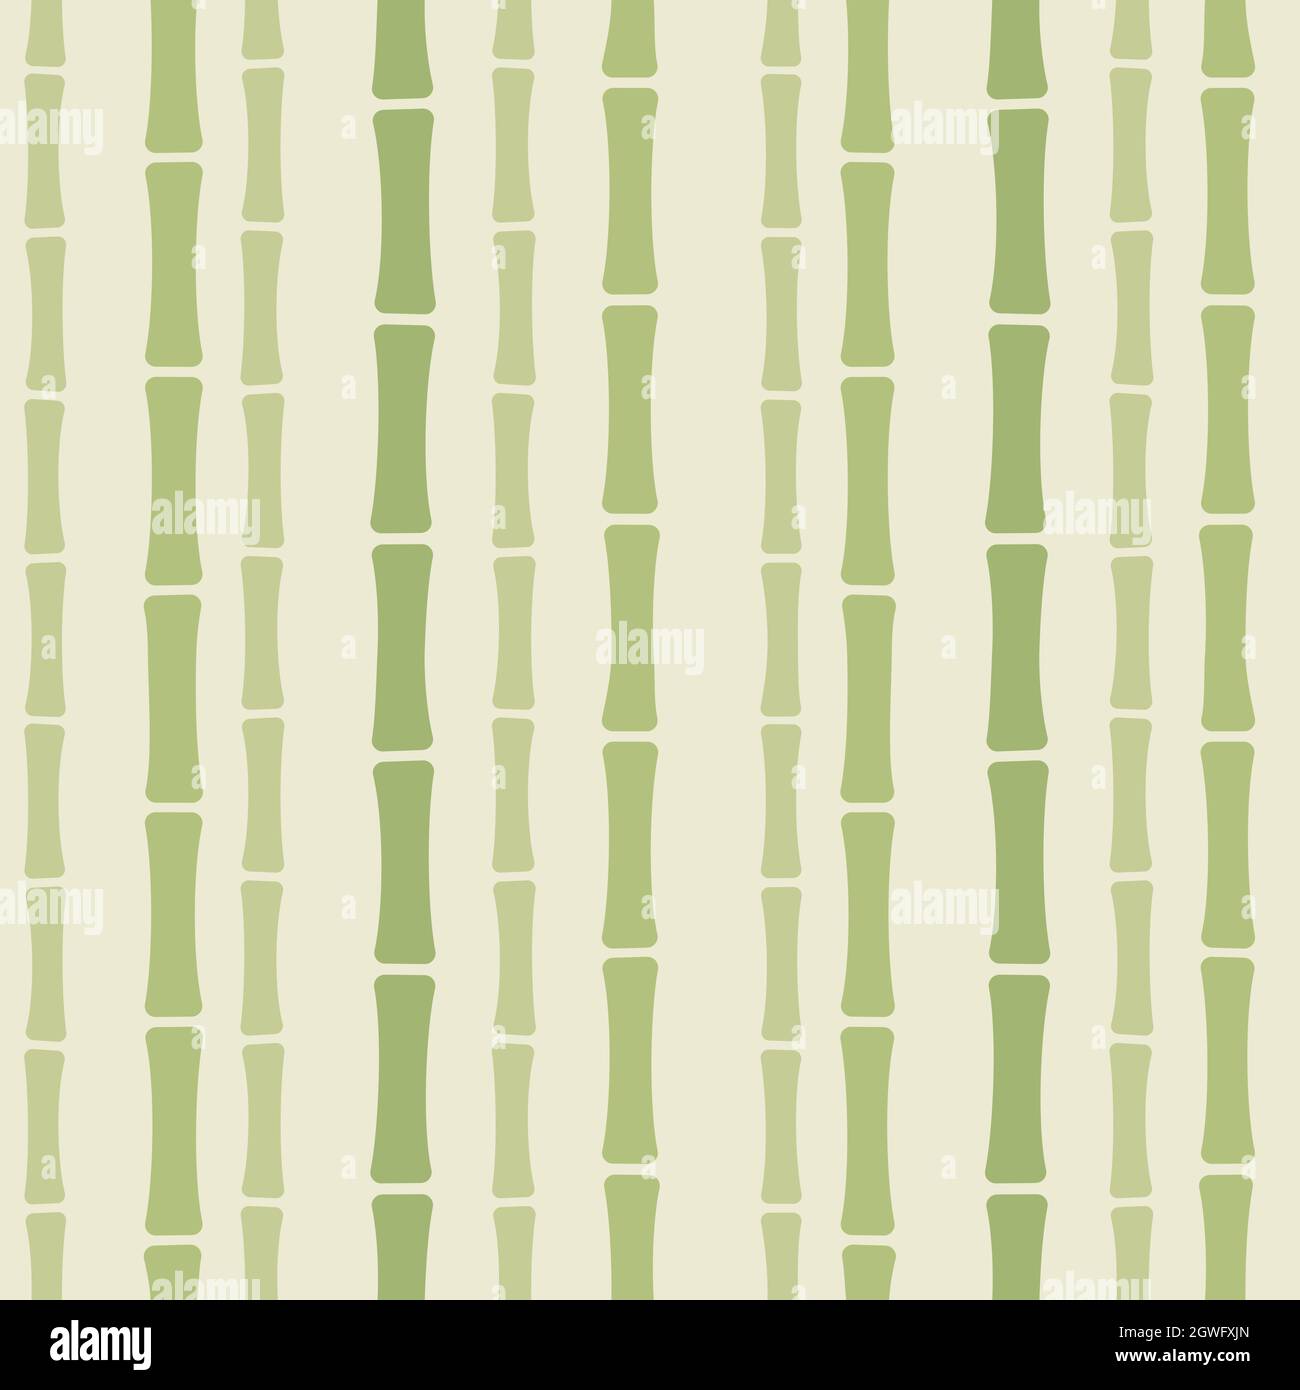 Seamless bamboo pattern. Bamboo stalks on muted beige background. Simple cartoon style vector texture. Stock Vector